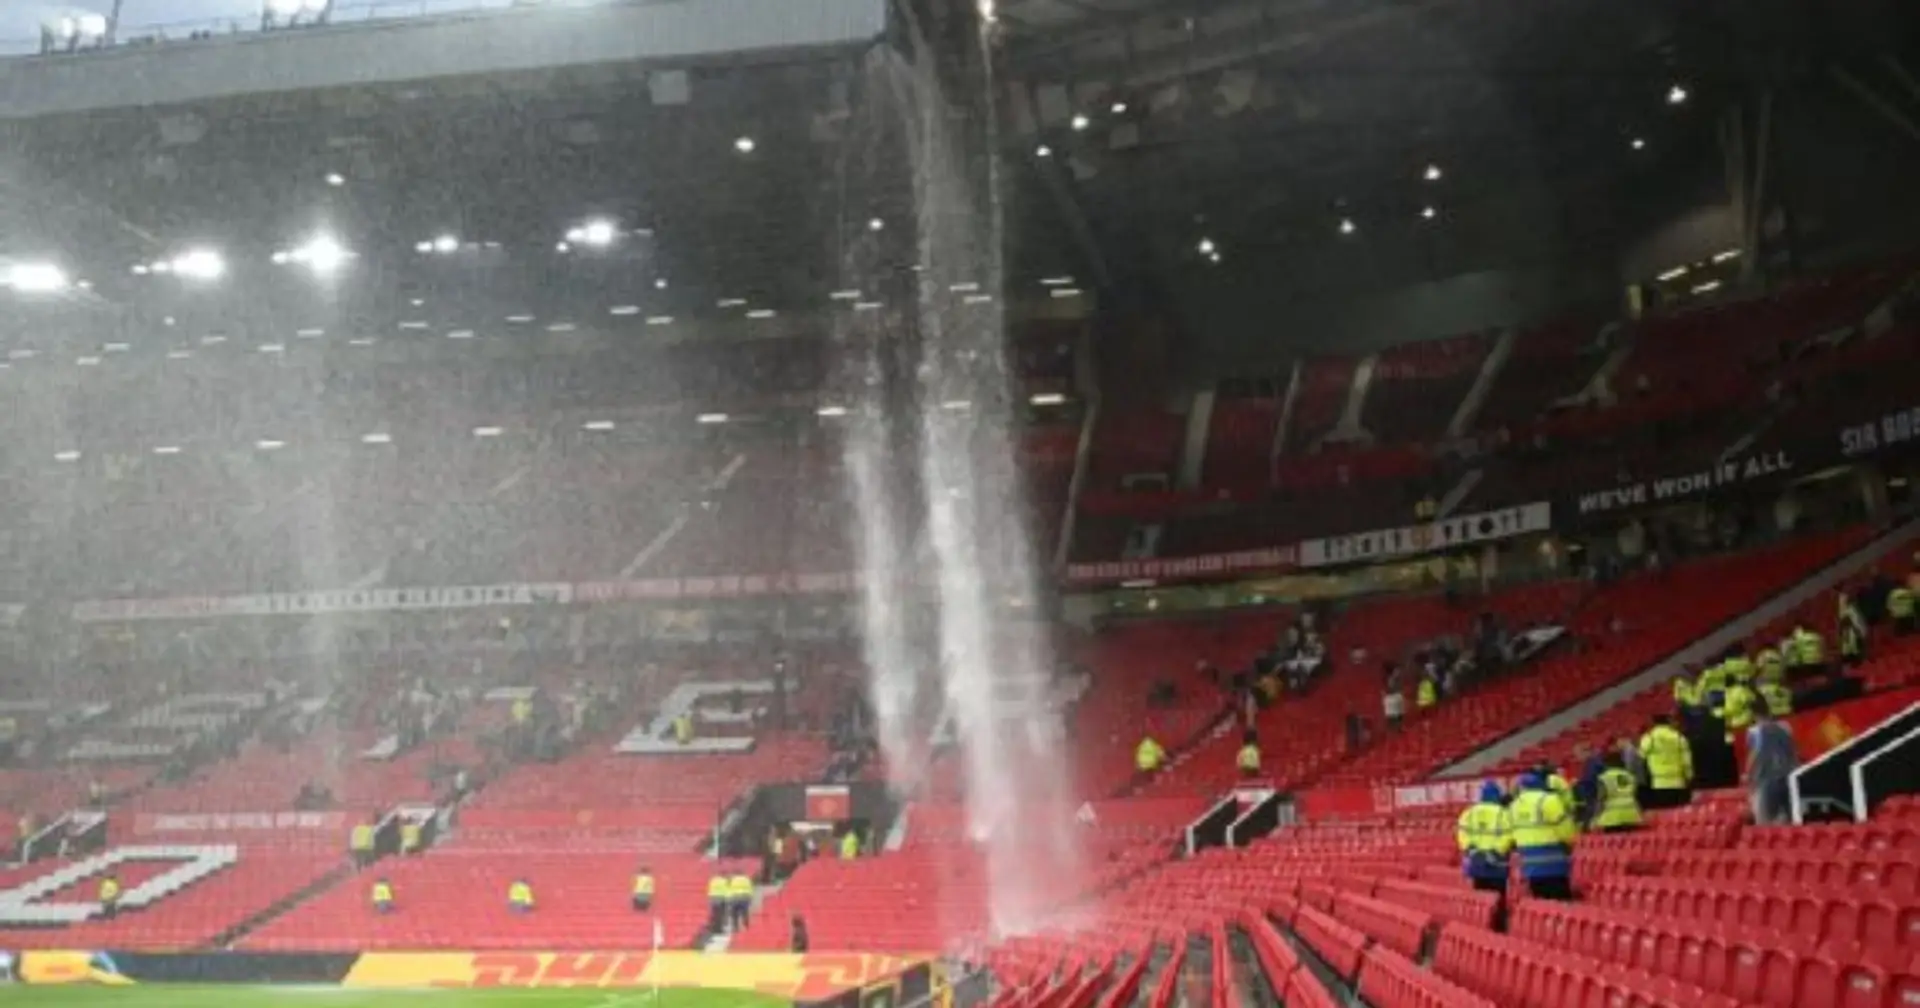 Revealed: what Man United chiefs are saying about 'England's 4th tallest waterfall' at Old Trafford